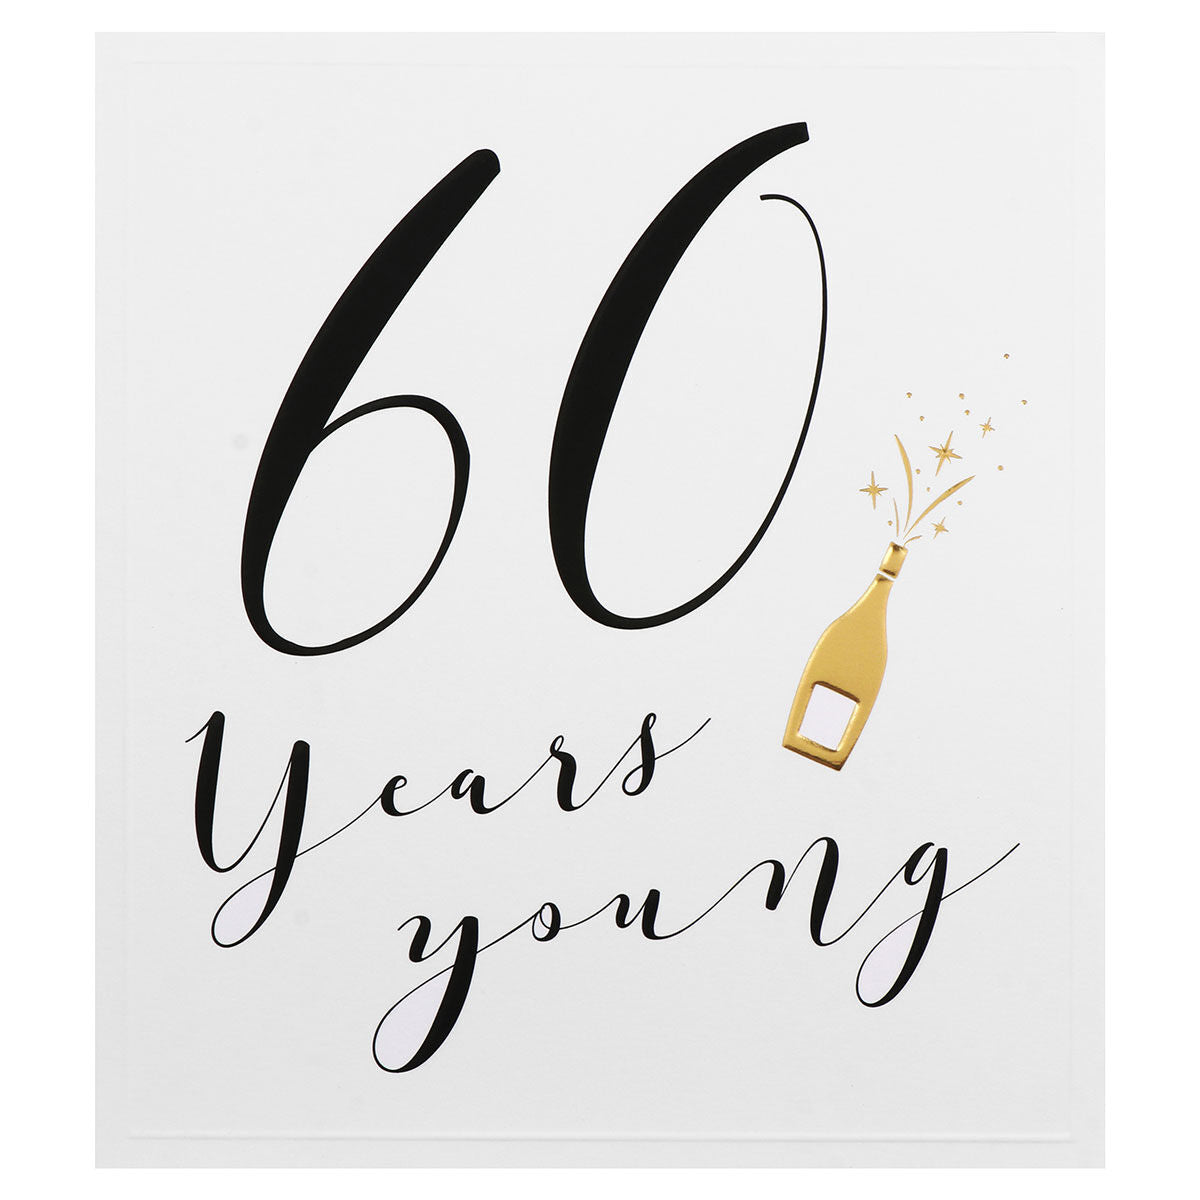 60th Birthday Card - No Frills Golden Champagne Popping